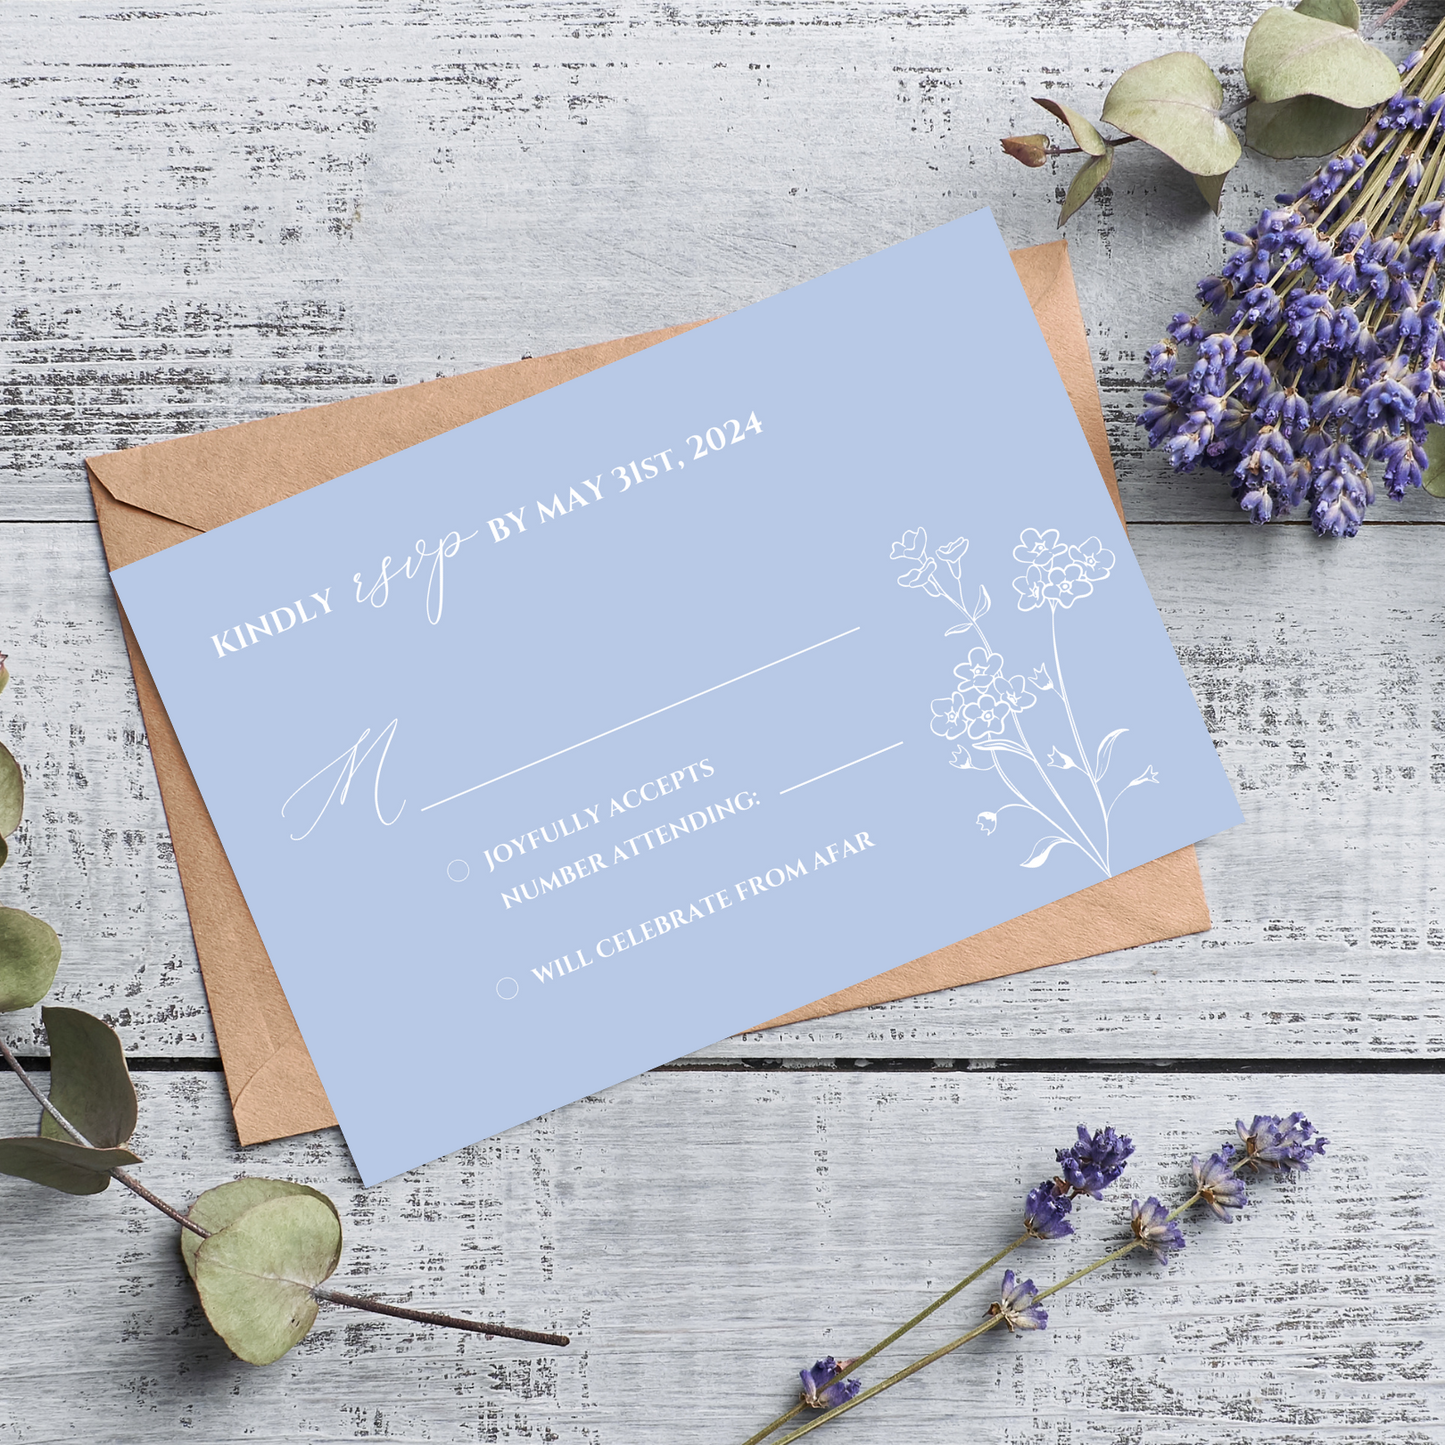 A light blue card sits on top of a kraft paper envelope against a rustic wood background. Sprigs of lilac and eucalyptus surround the card. On the R.S.V.P. itself, there is white text and a minimalist floral design. 